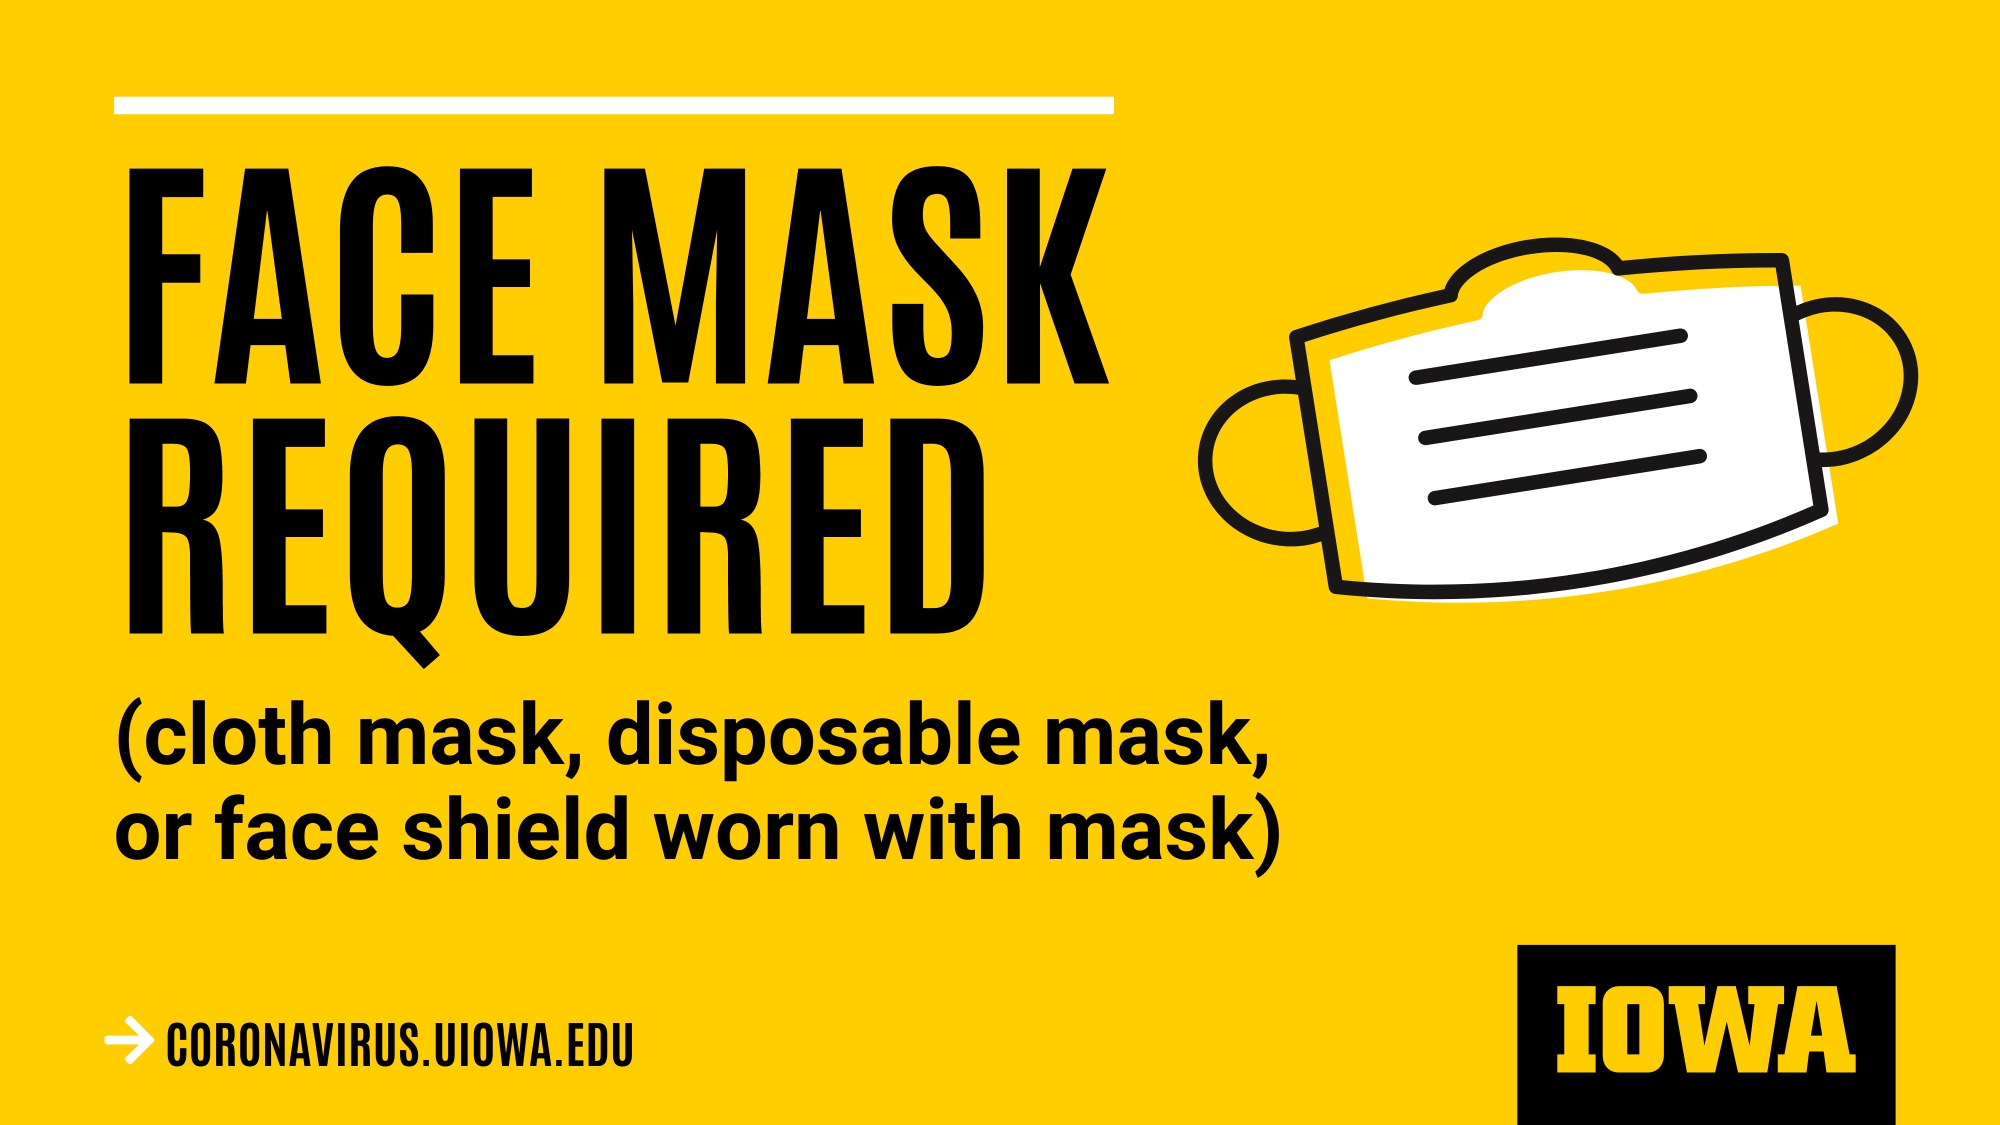 Face mask required consists of cloth mask, disposable mask or face shield worn with mask